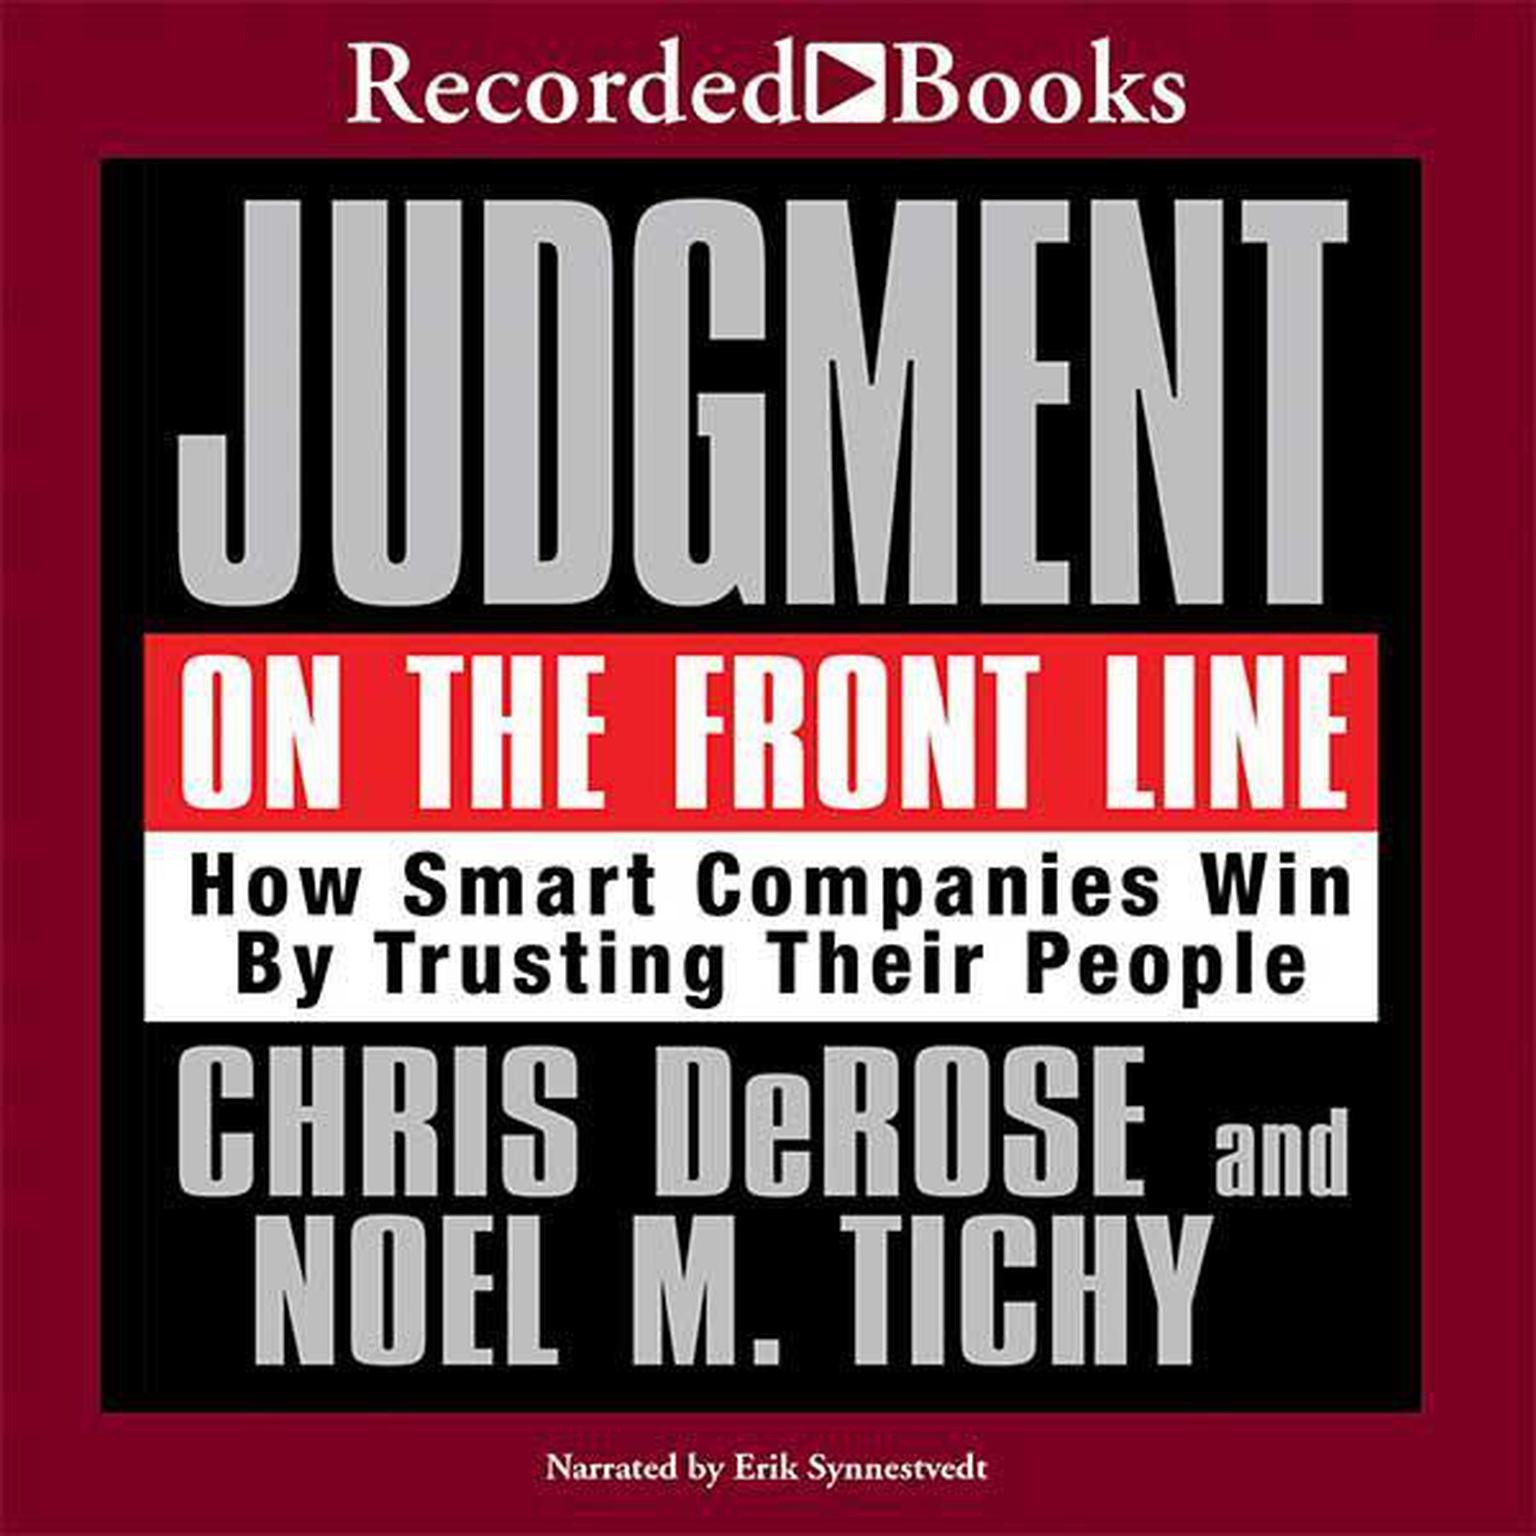 Judgment on the Front Line: How Smart Companies Win By Trusting Their People Audiobook, by Chris DaRose